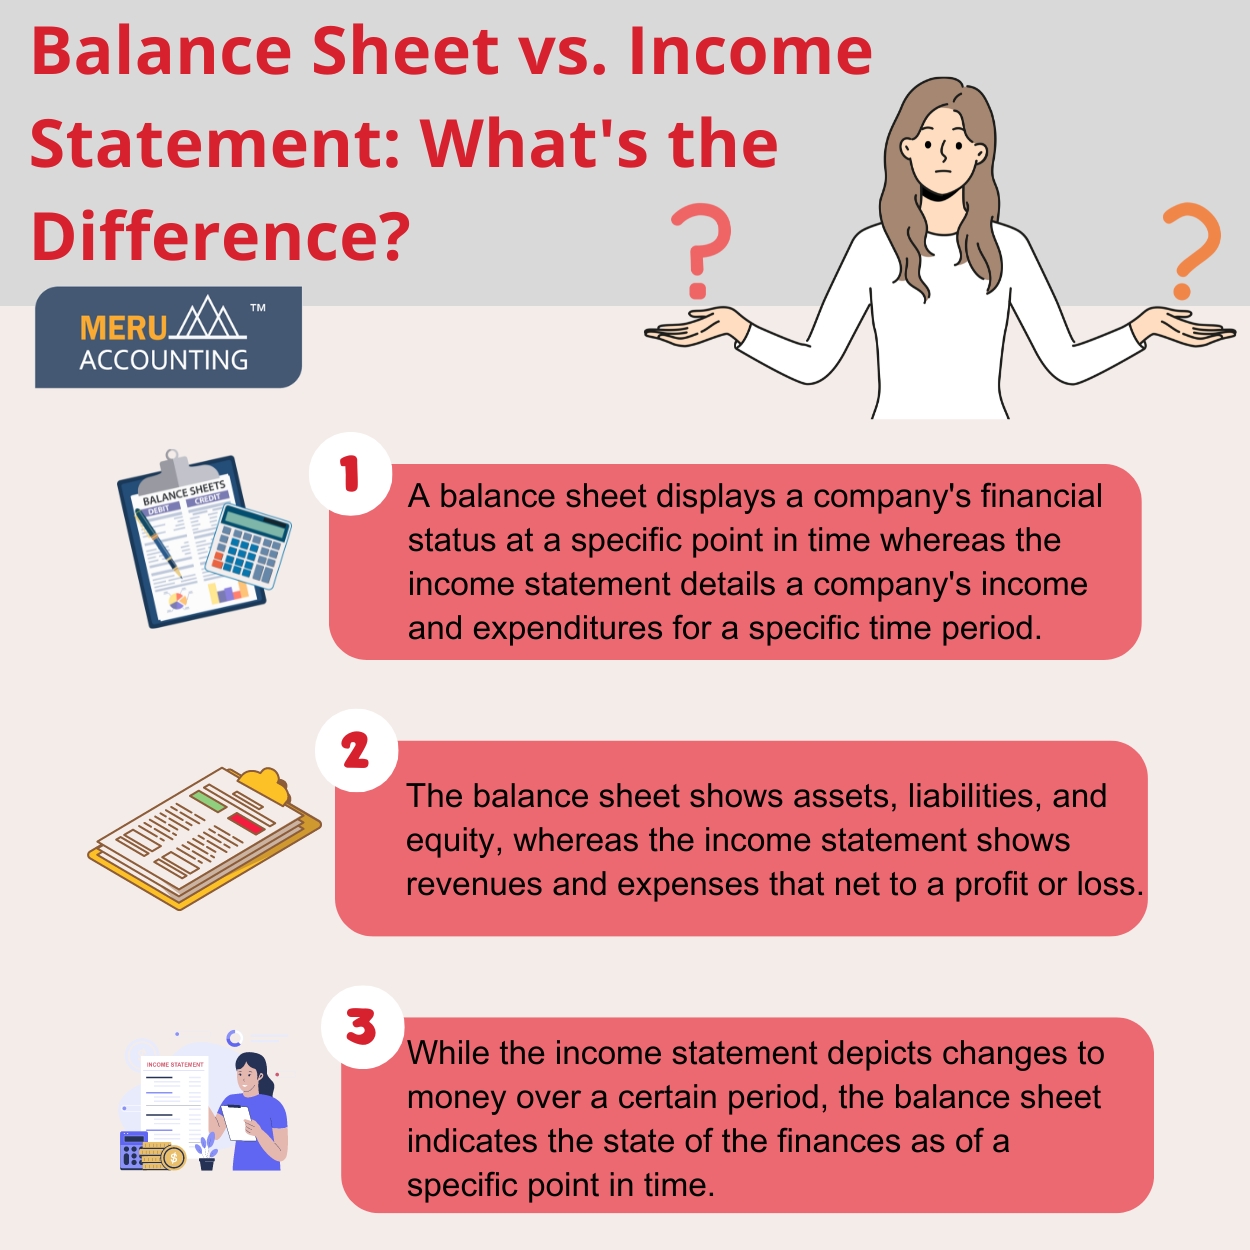 Balance Sheet vs. Income Statement Whats the Difference 1250 by 1250 v1 1